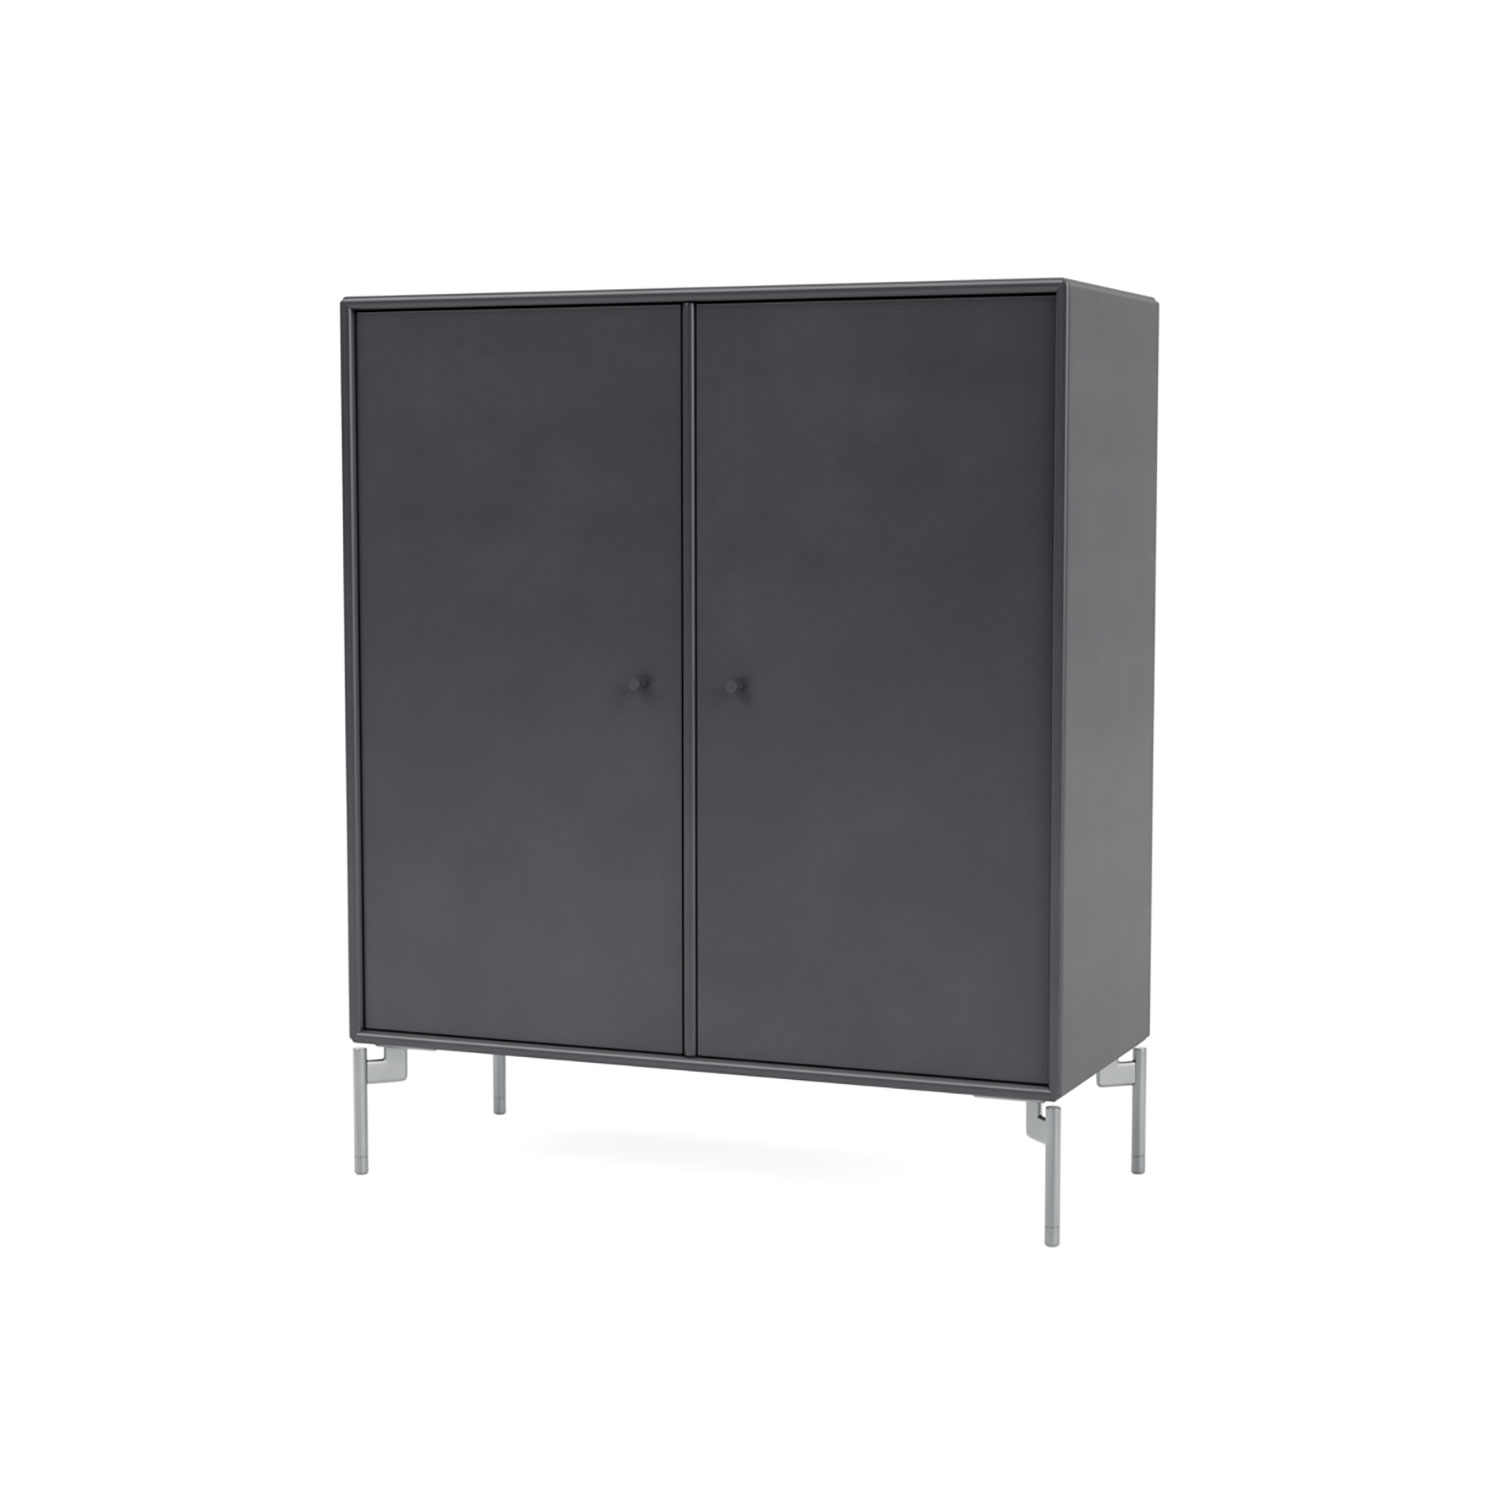 COVER Cabinet 1118, Coal